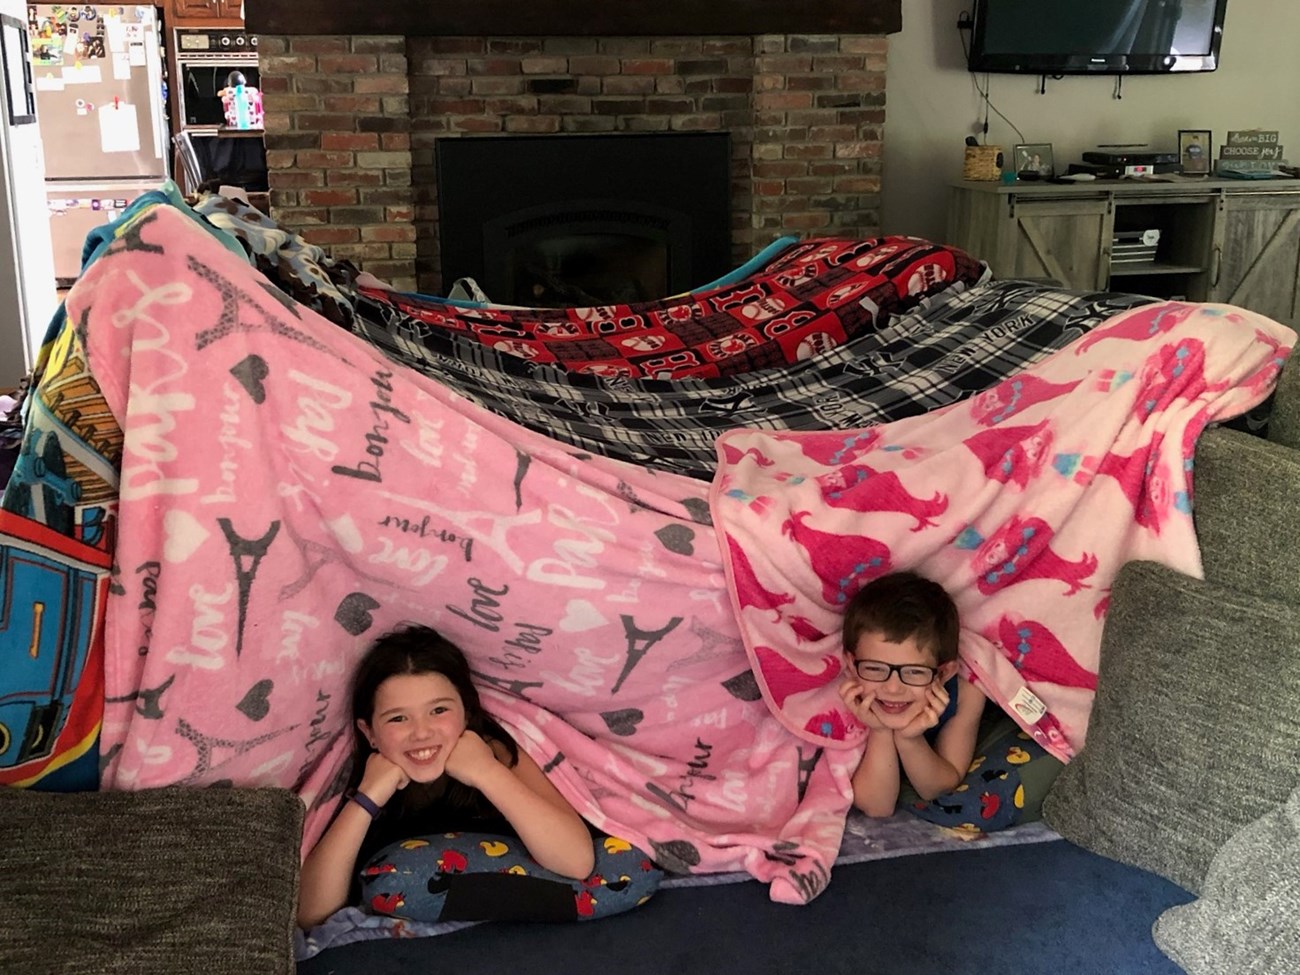 Two kids in a fort made of blankets.